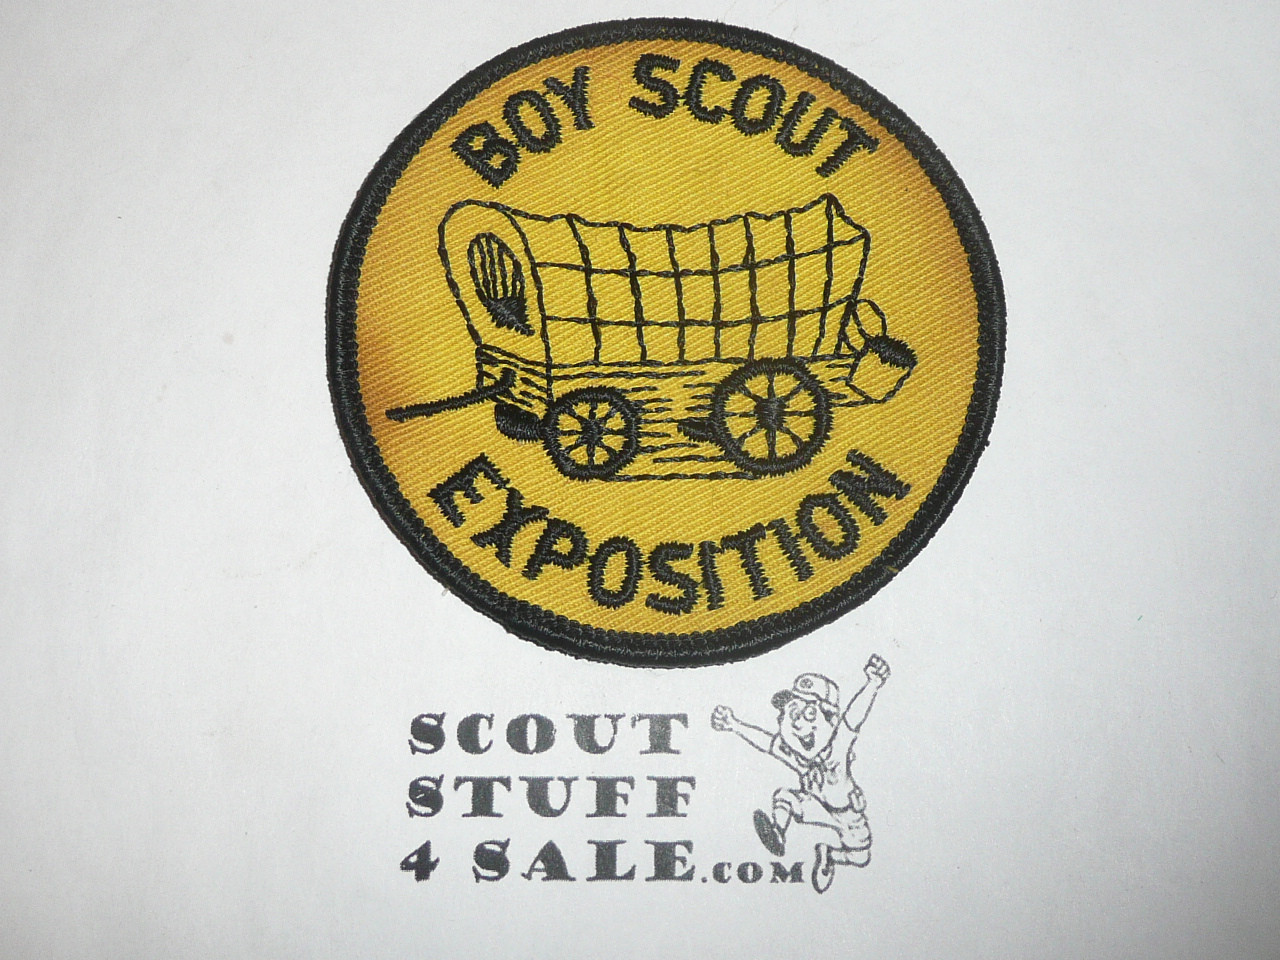 Boy Scout Exposition Patch, Generic BSA issue, yellow twill, black r/e bdr